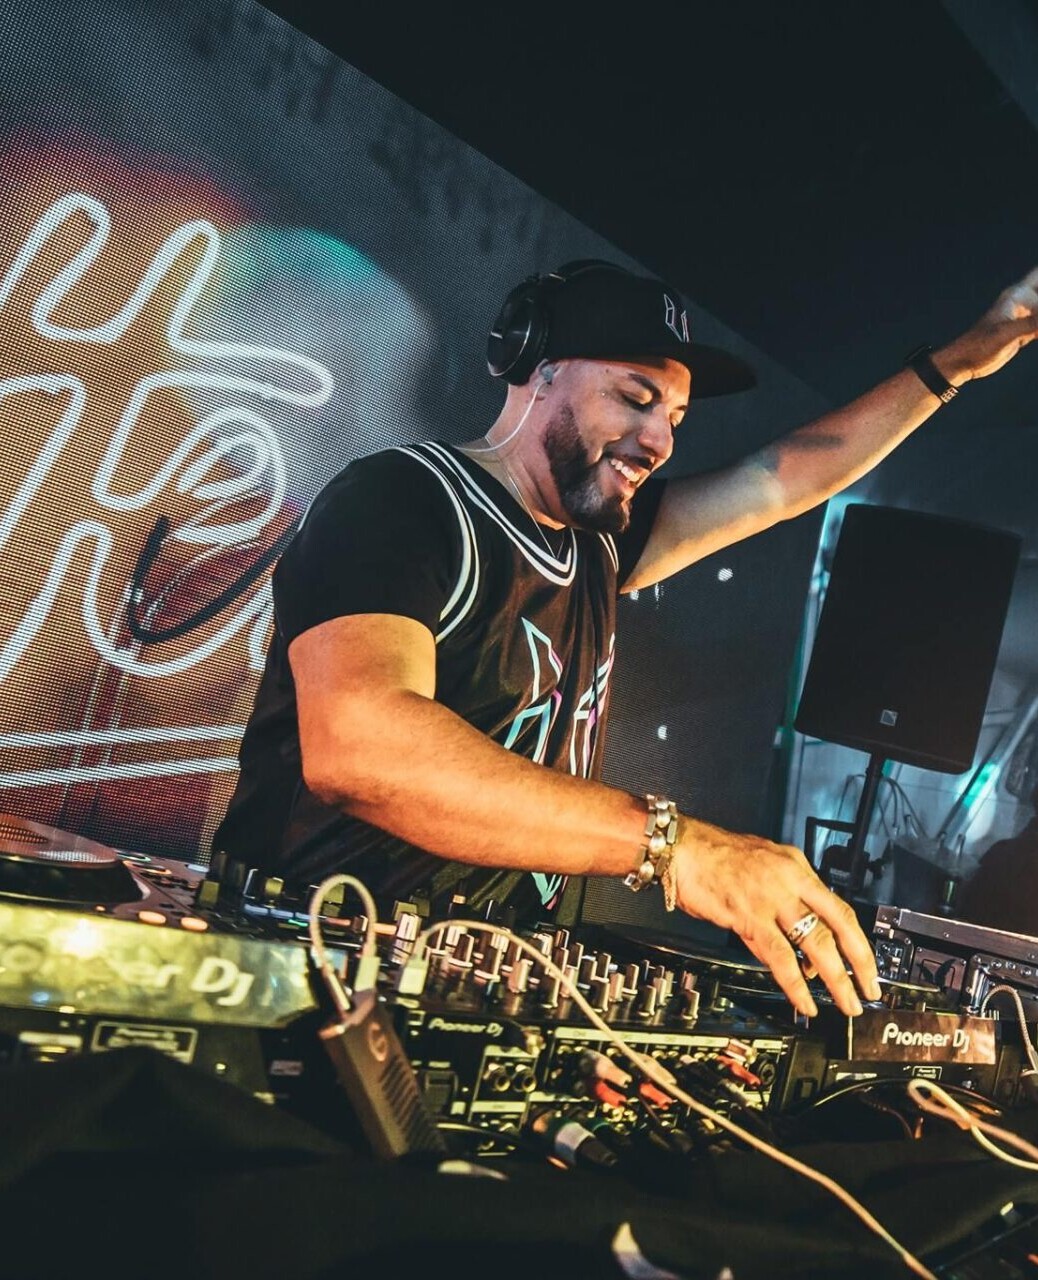 Release Yourself Radio Show #1112 – Roger Sanchez Live In the Mix from Soho Garden, Dubai (AUDIO)